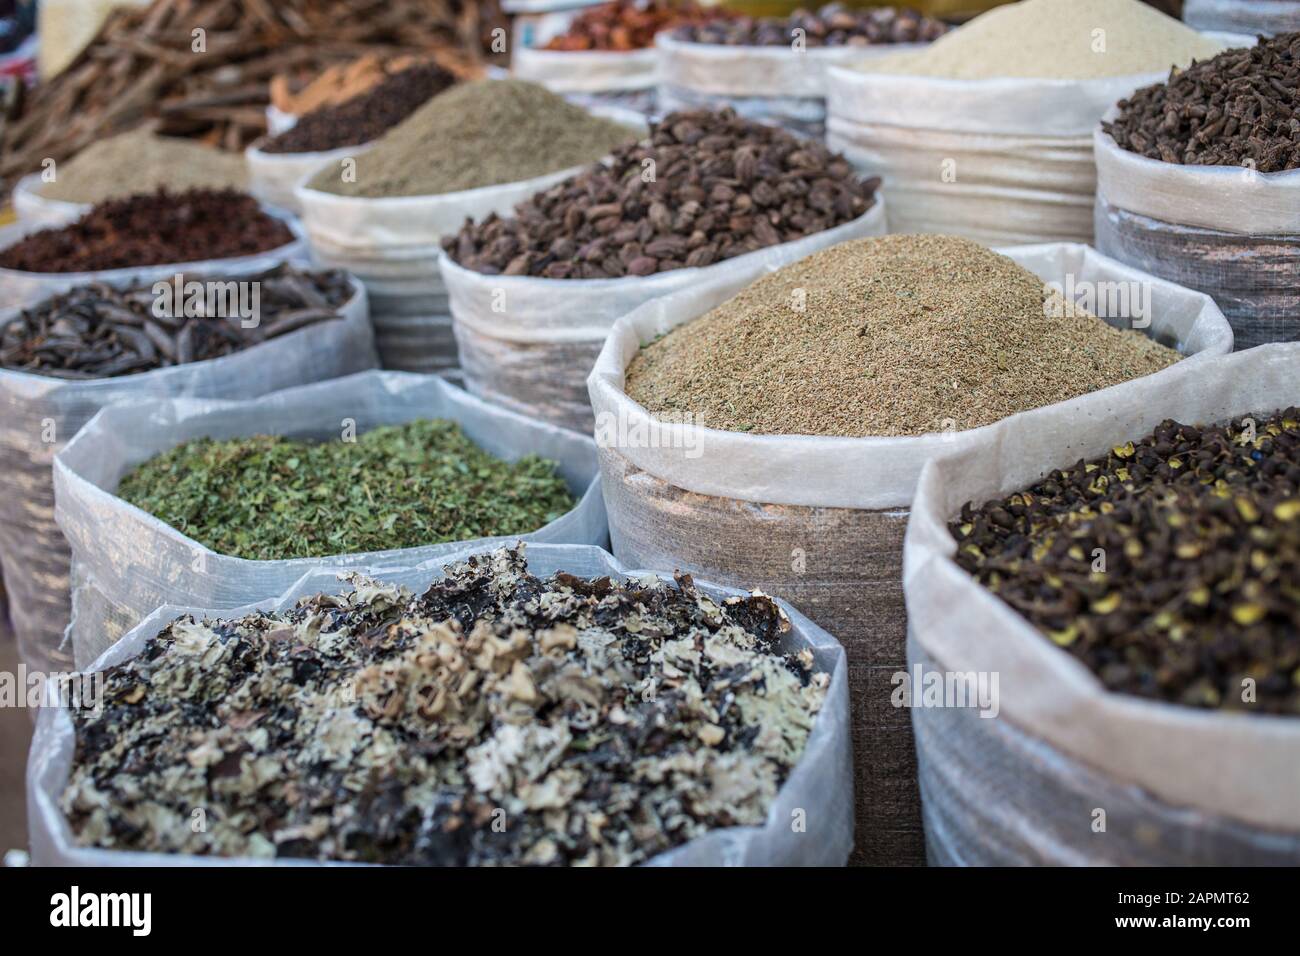 Spices at a local market in India. Stock Photo